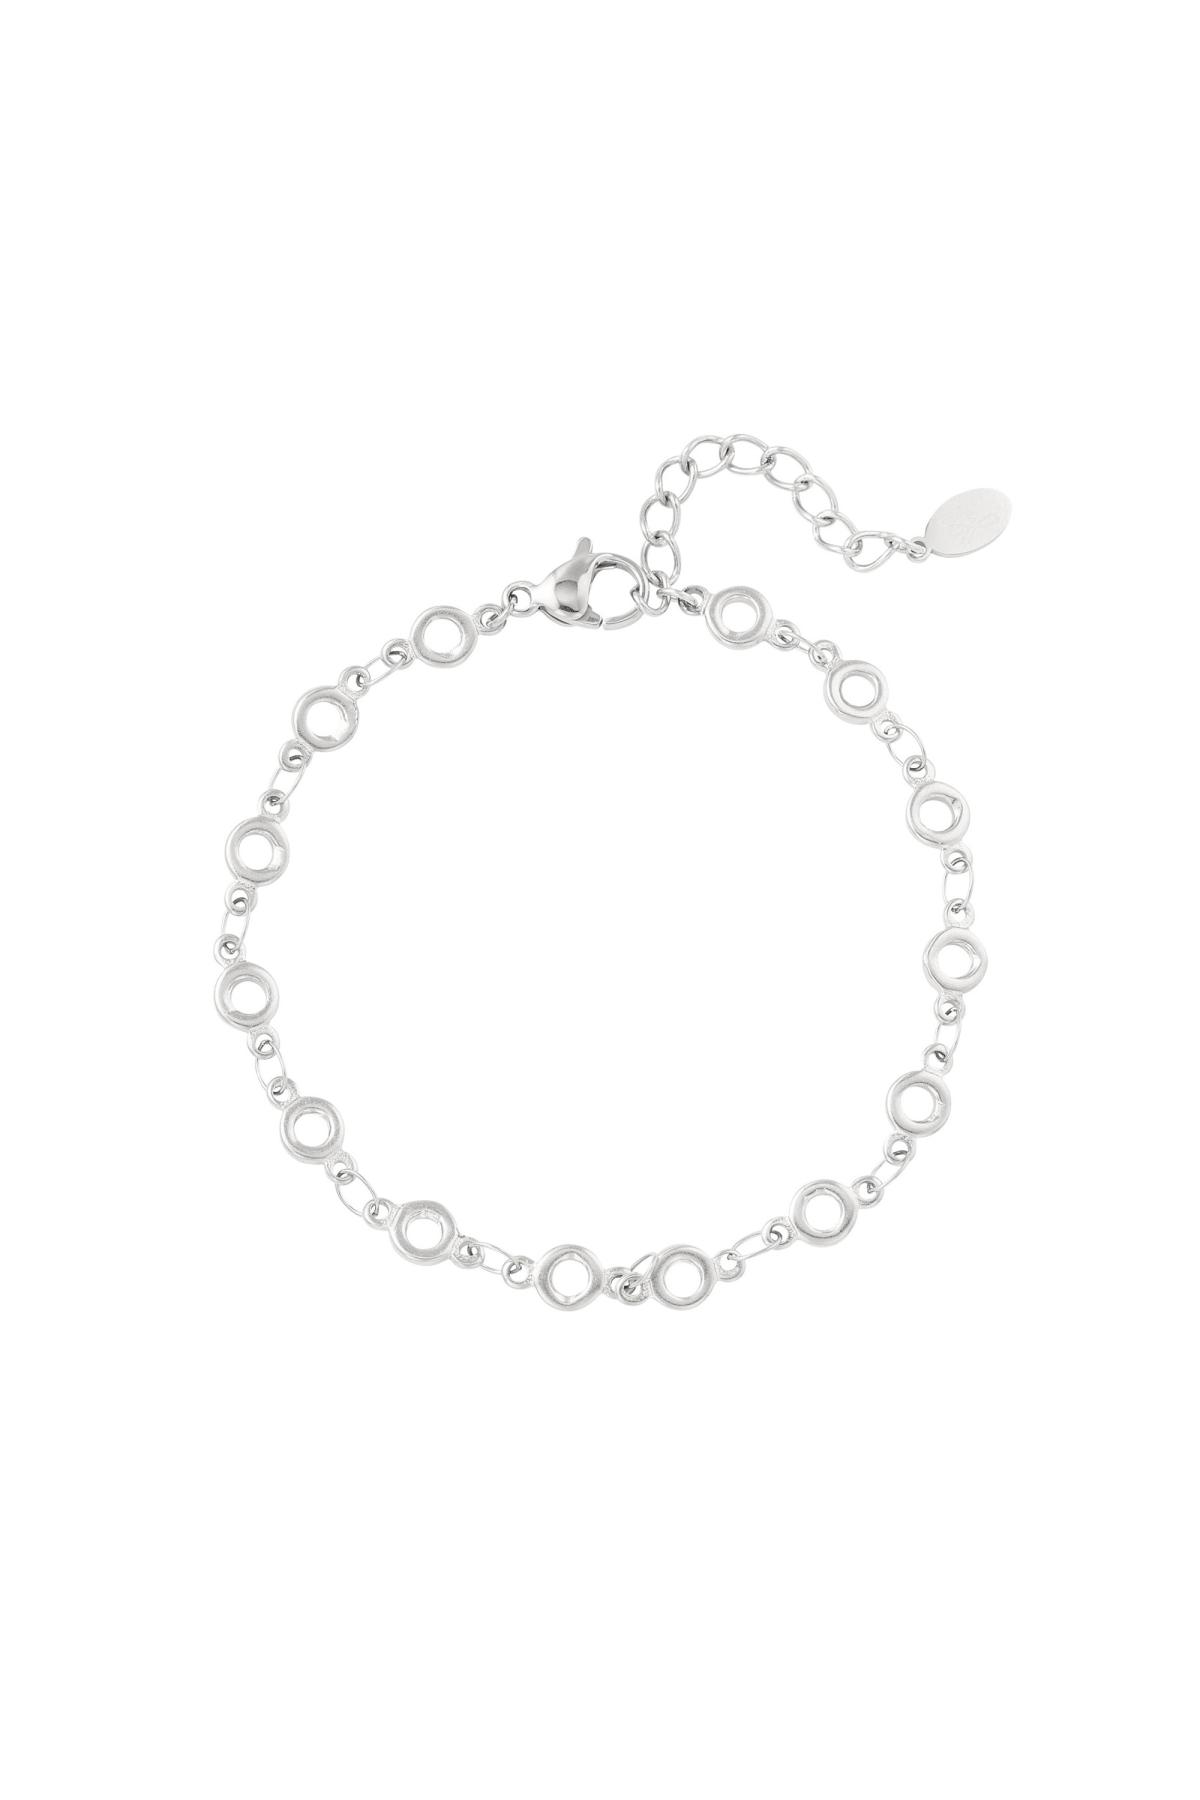 Link bracelet circles Silver Stainless Steel 